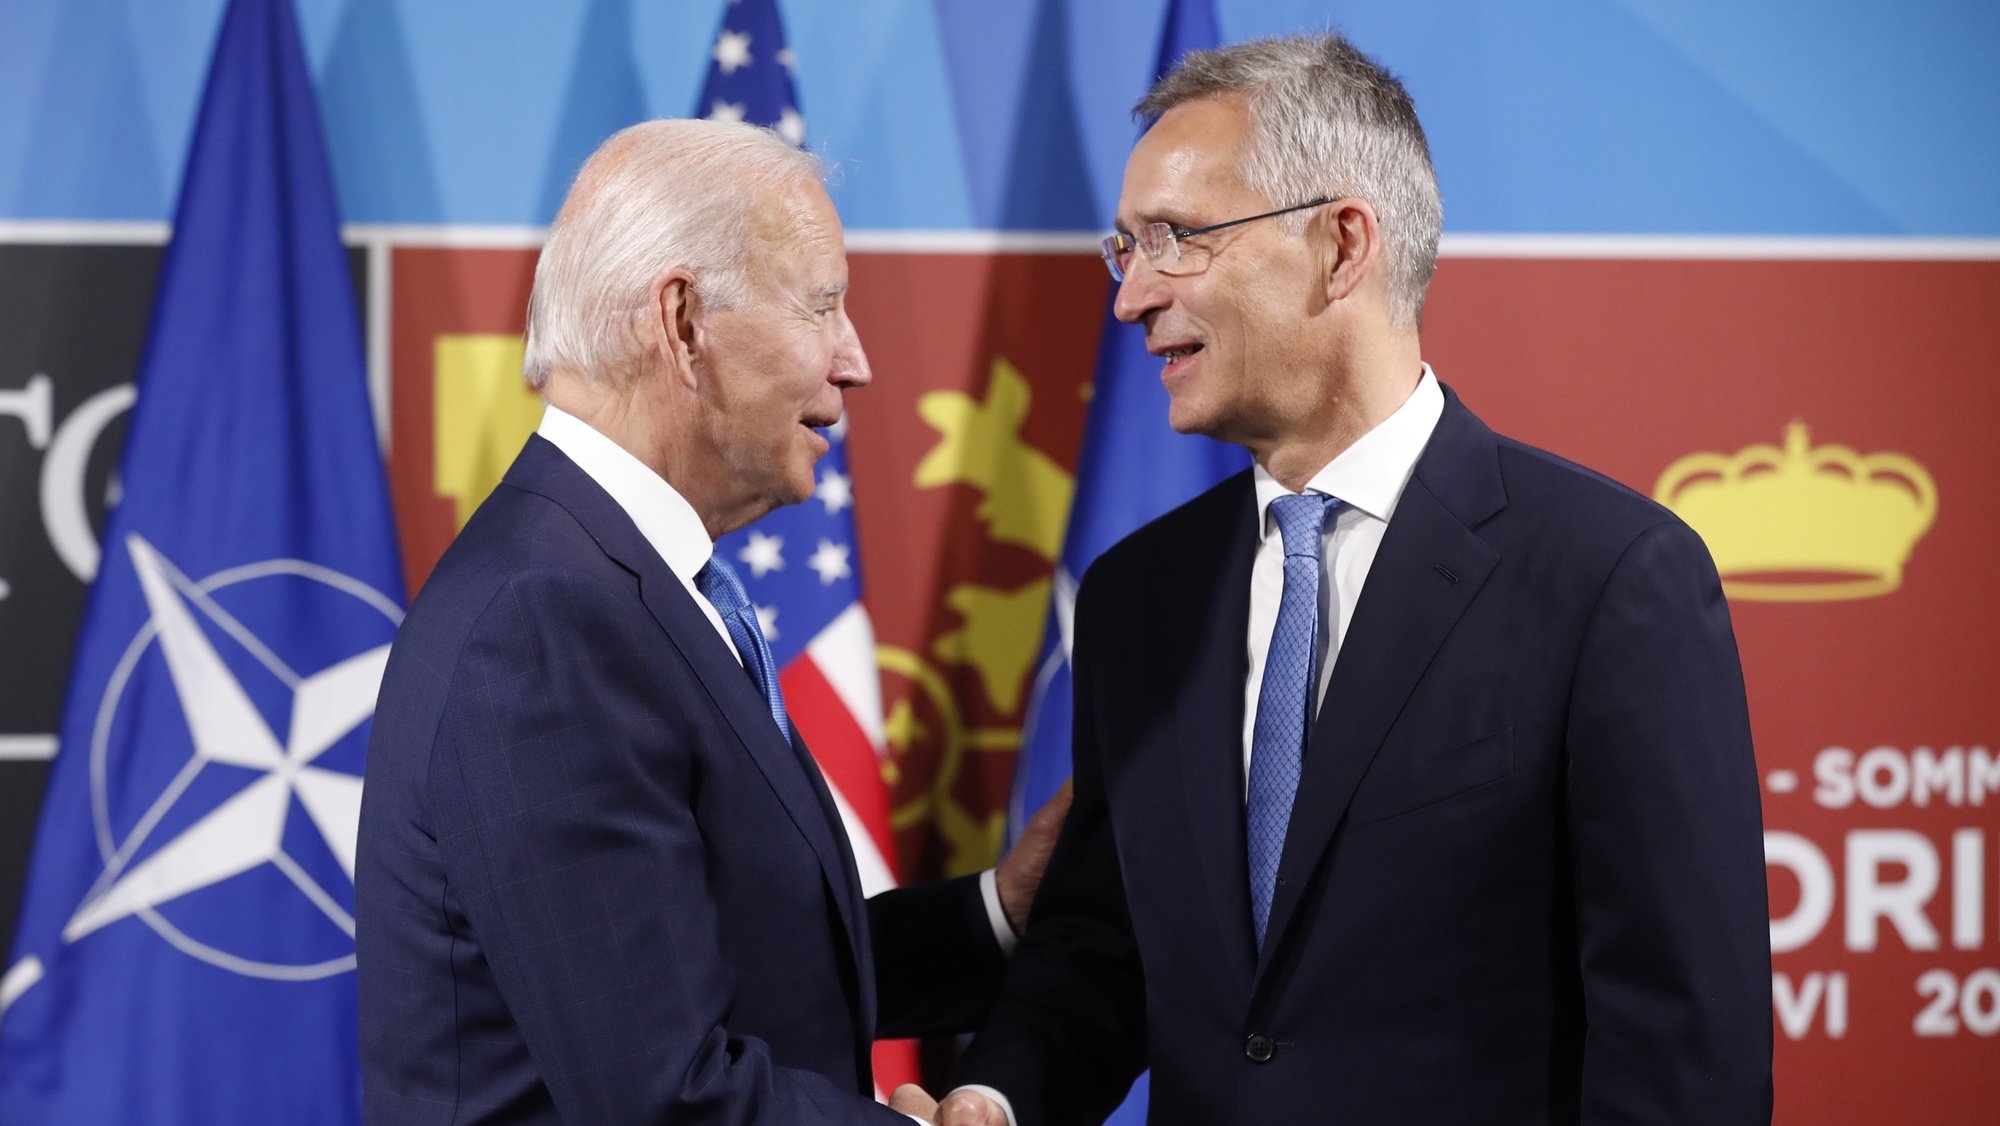 epa10040330 NATO Secretary-General, Jens Stoltenberg (R), shakes hands with US President, Joe Biden (L), during their bilateral meeting held on the first day of the NATO summit at IFEMA congress centre in Madrid, Spain, 29 June 2022. Heads of State and Government of NATO&#039;s member countries and key partners are gathering in Madrid from 29 to 30 June to discuss security concerns like Russia&#039;s invasion of Ukraine and other challenges. Spain is hosting 2022 NATO Summit coinciding with the 40th anniversary of its accession to NATO.  EPA/LAVANDEIRA JR.